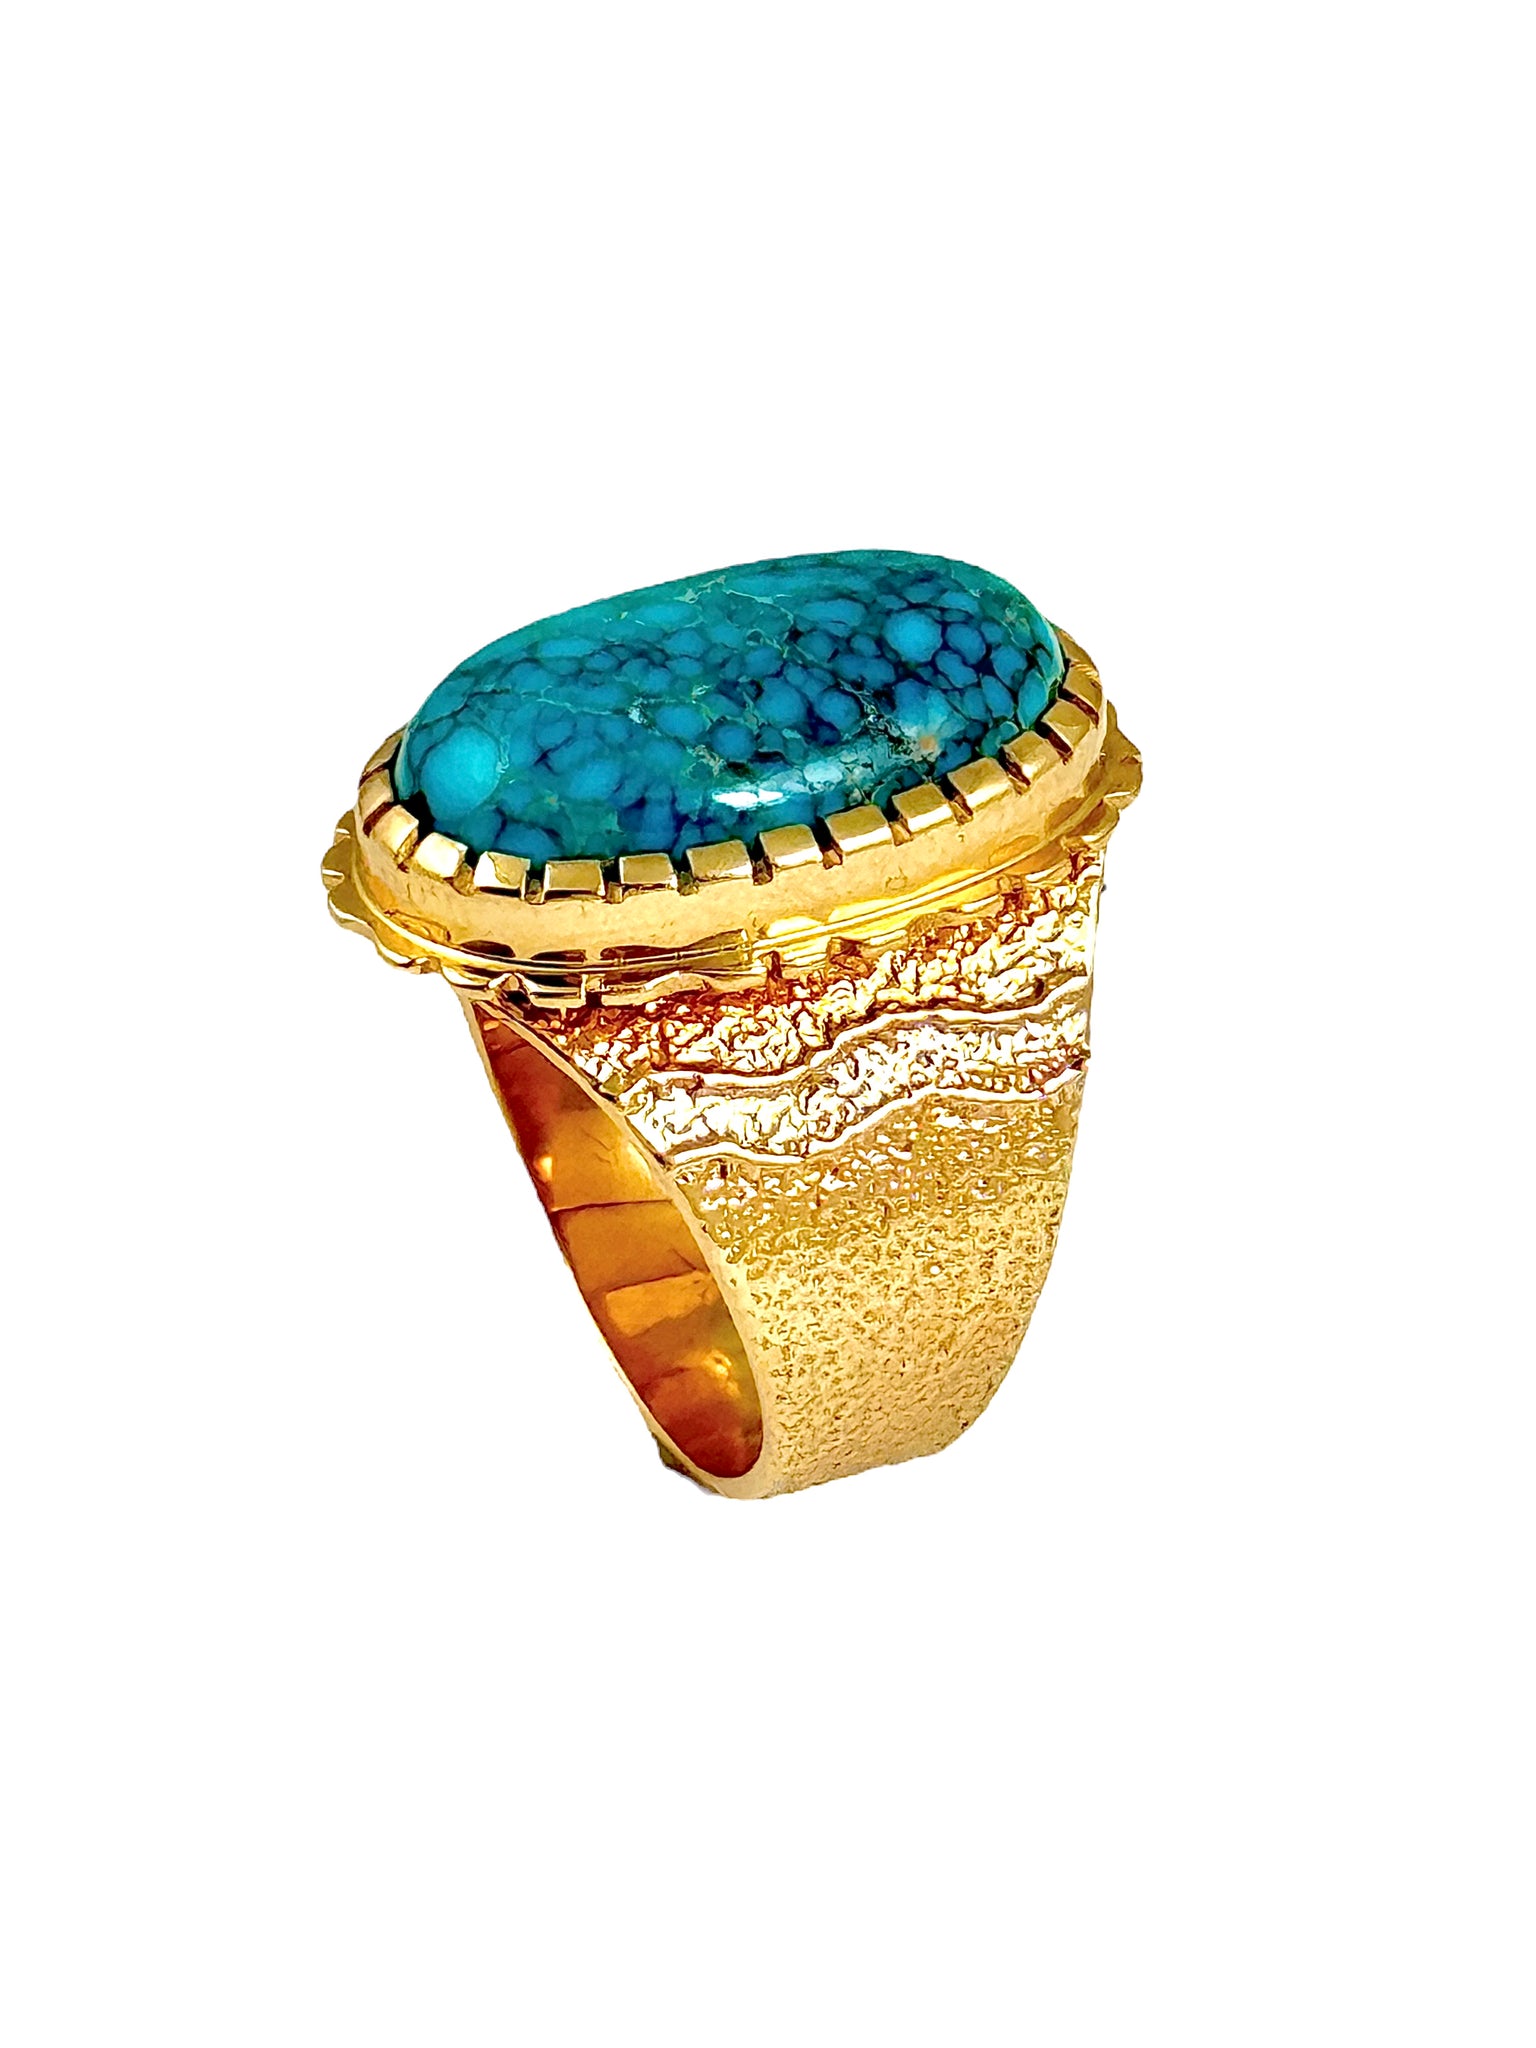 SOLD Ric Charlie Gold and Turquoise Ring